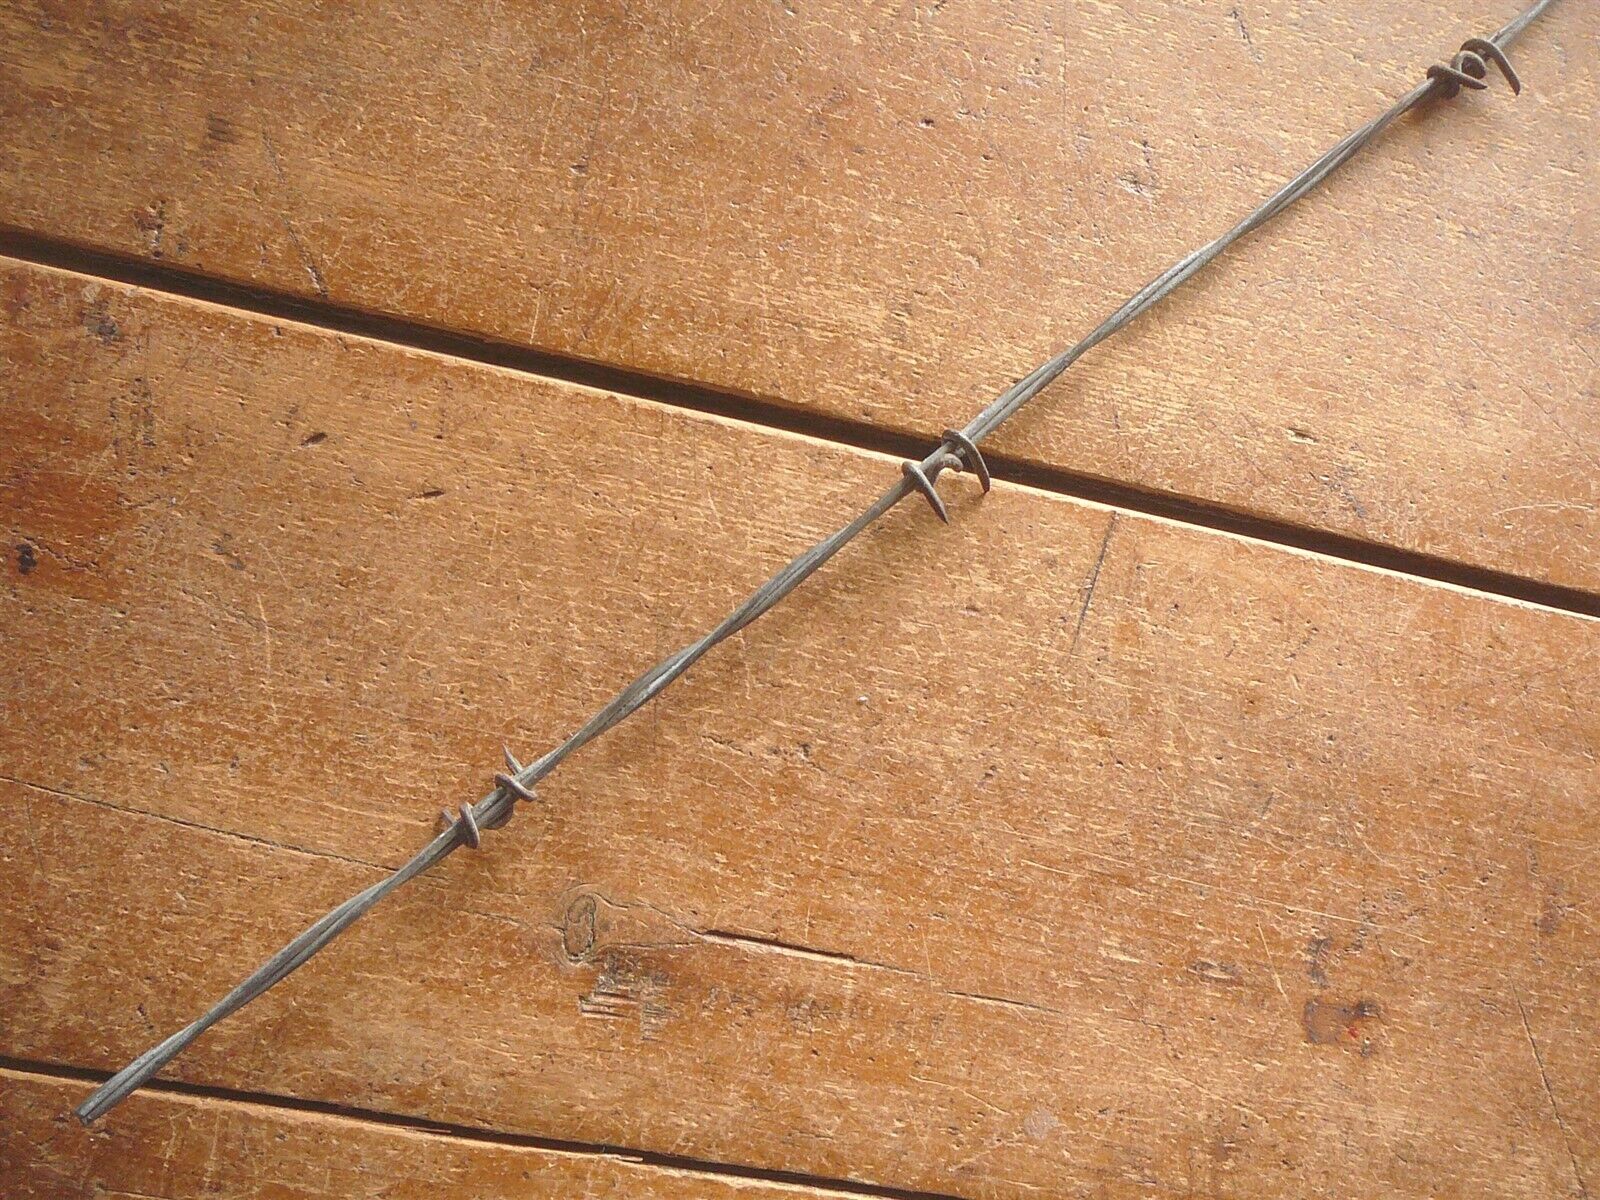 MERRILLS TWIRL TWO POINT BARB on 2 LINES - ALL GALVANIZED - ANTIQUE BARBED WIRE 